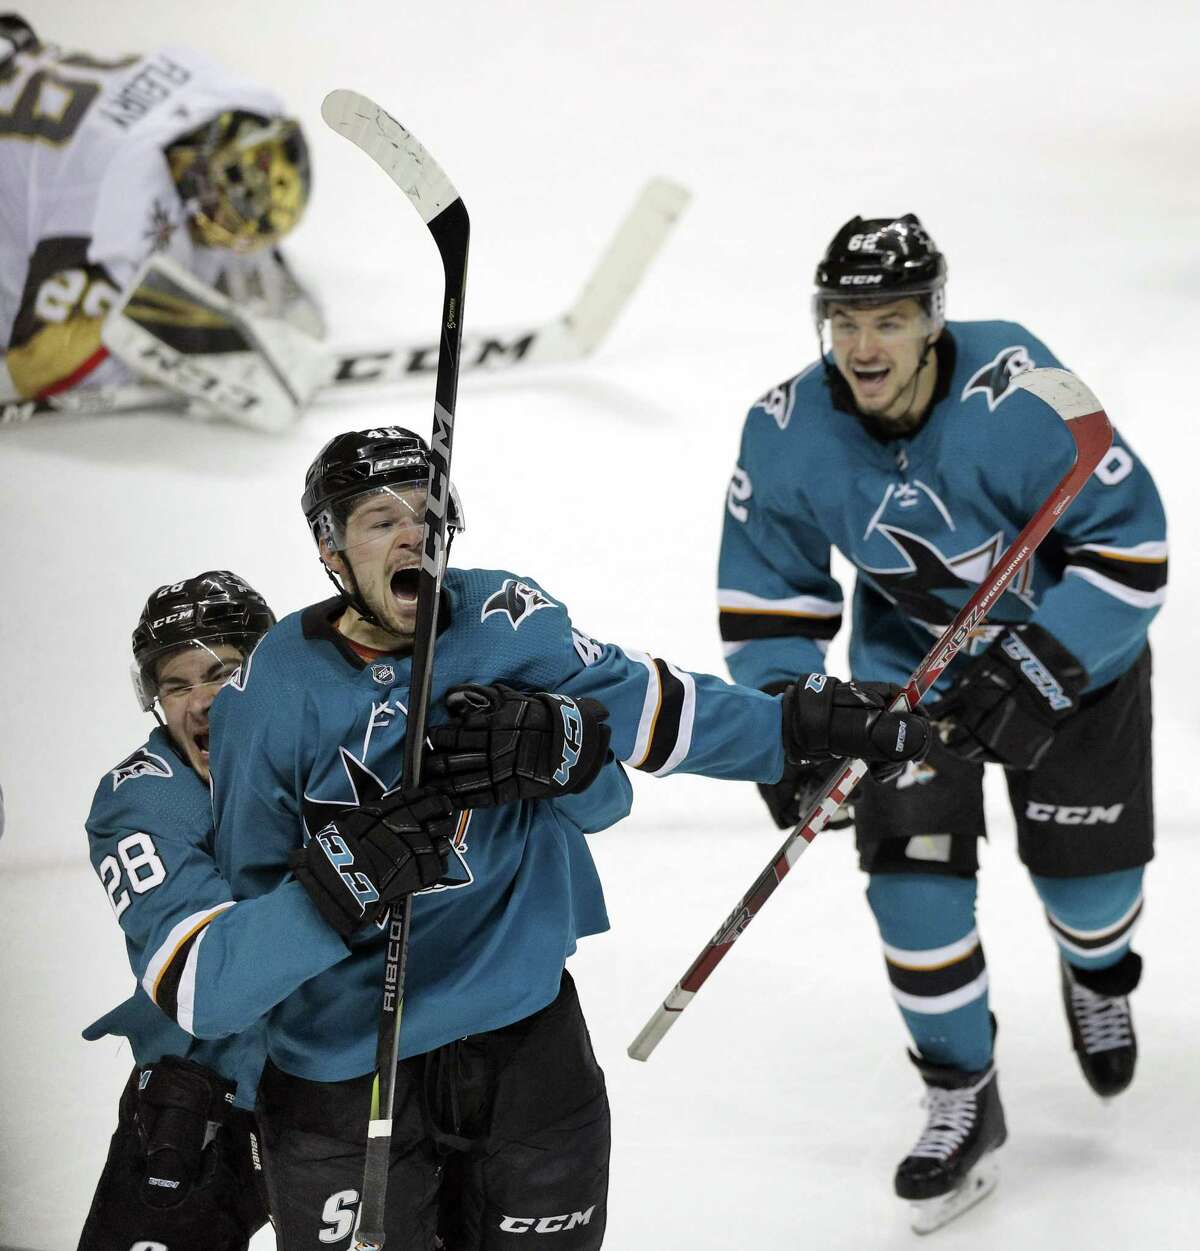 Tomas Hertl (48) celebrates his game-tying goal in the third period with Timo Meier (28) and Kevin Labanc (62) as the Sharks played the Vegas Golden Knights in Game 1 of the second round of the NHL Stanley Cup playoffs at SAP Center on April 30.